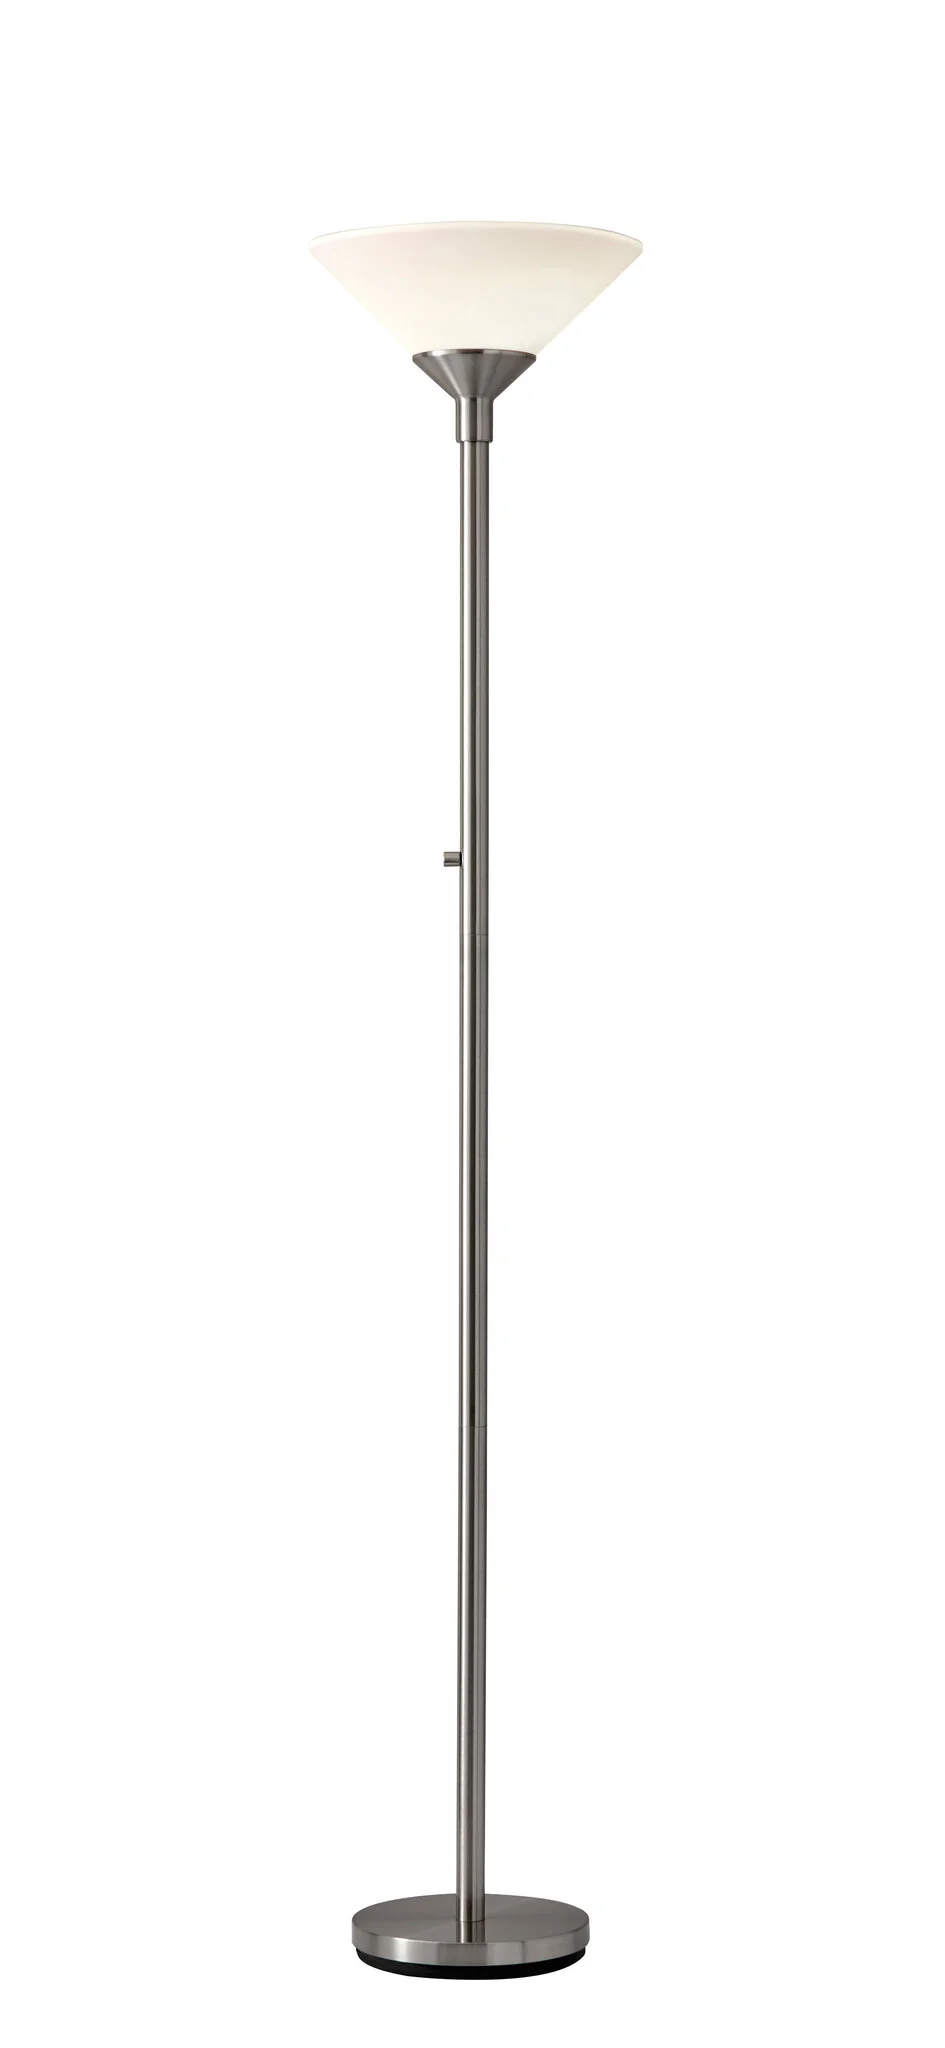 73" Torchiere Floor Lamp With White Cone Shade-372810-1